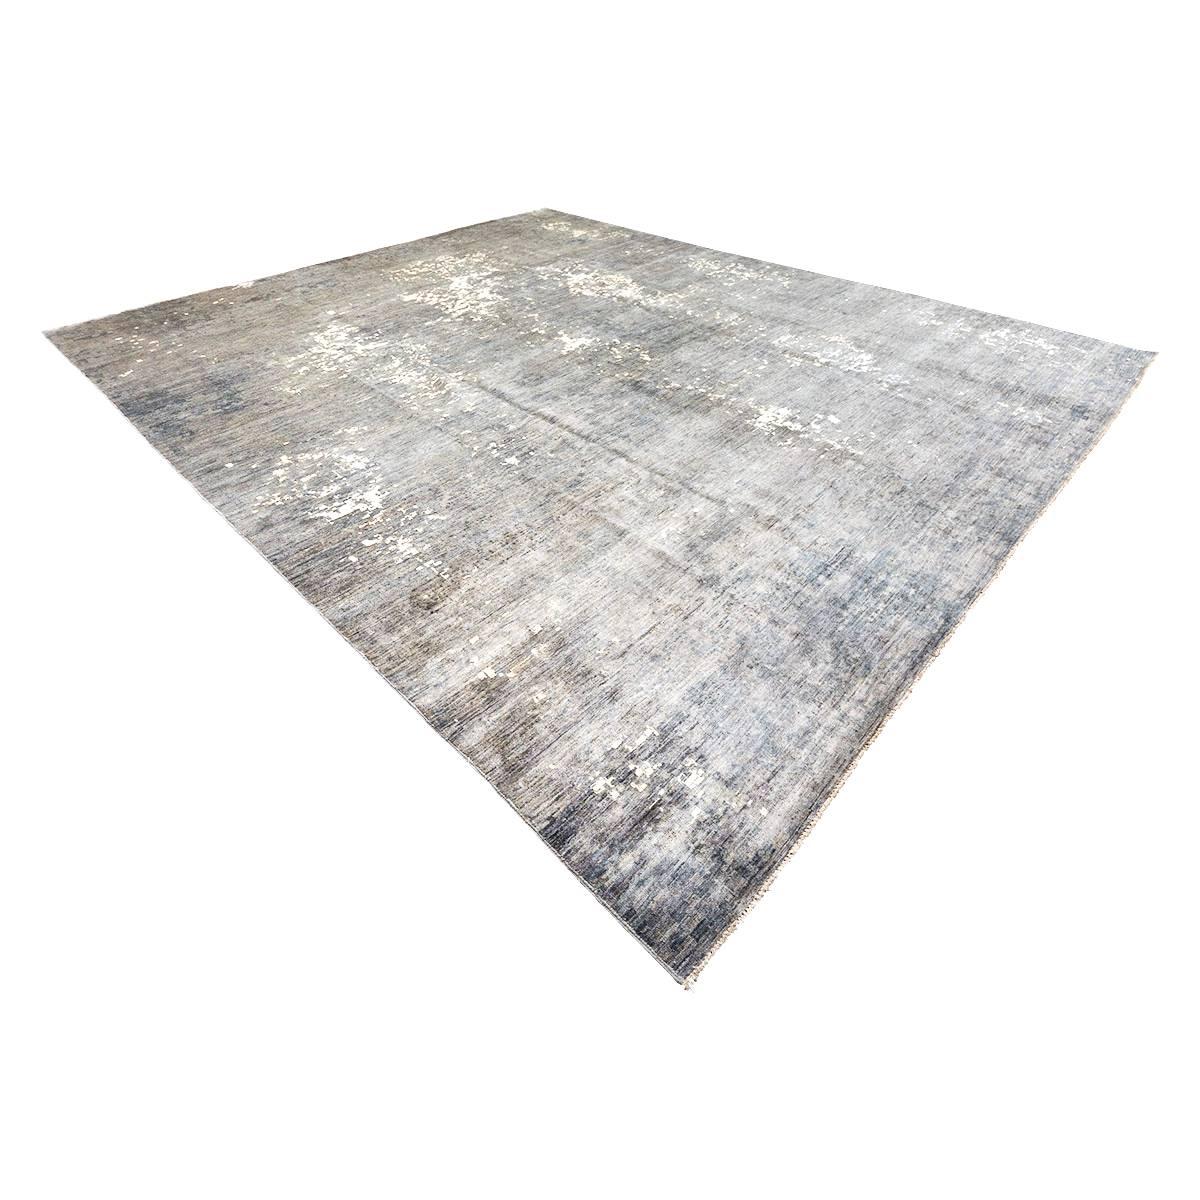 Modern 21st Century Silk and Wool Rug, Grey Colors over Abstract Design.